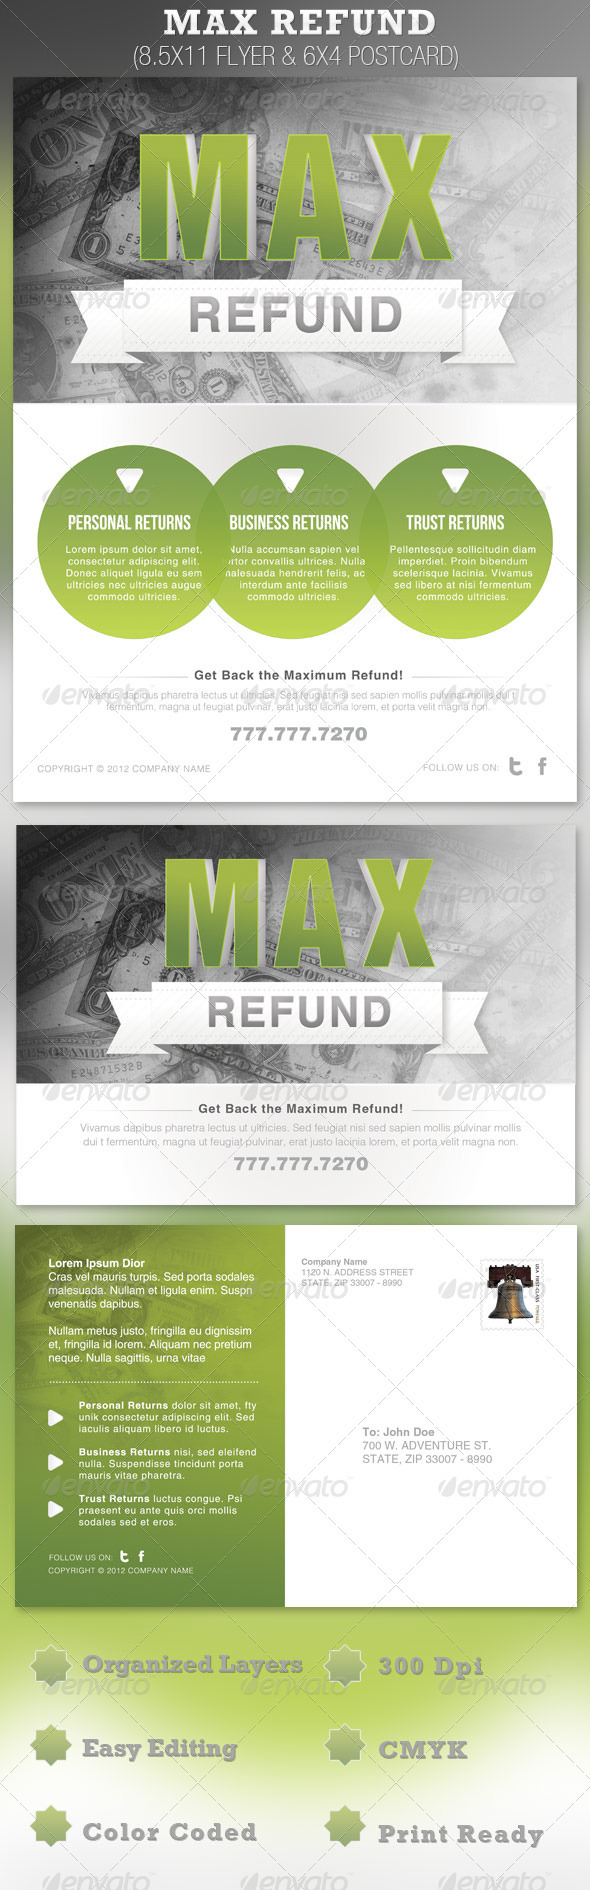 Max Refund Flyer and Postcard Template